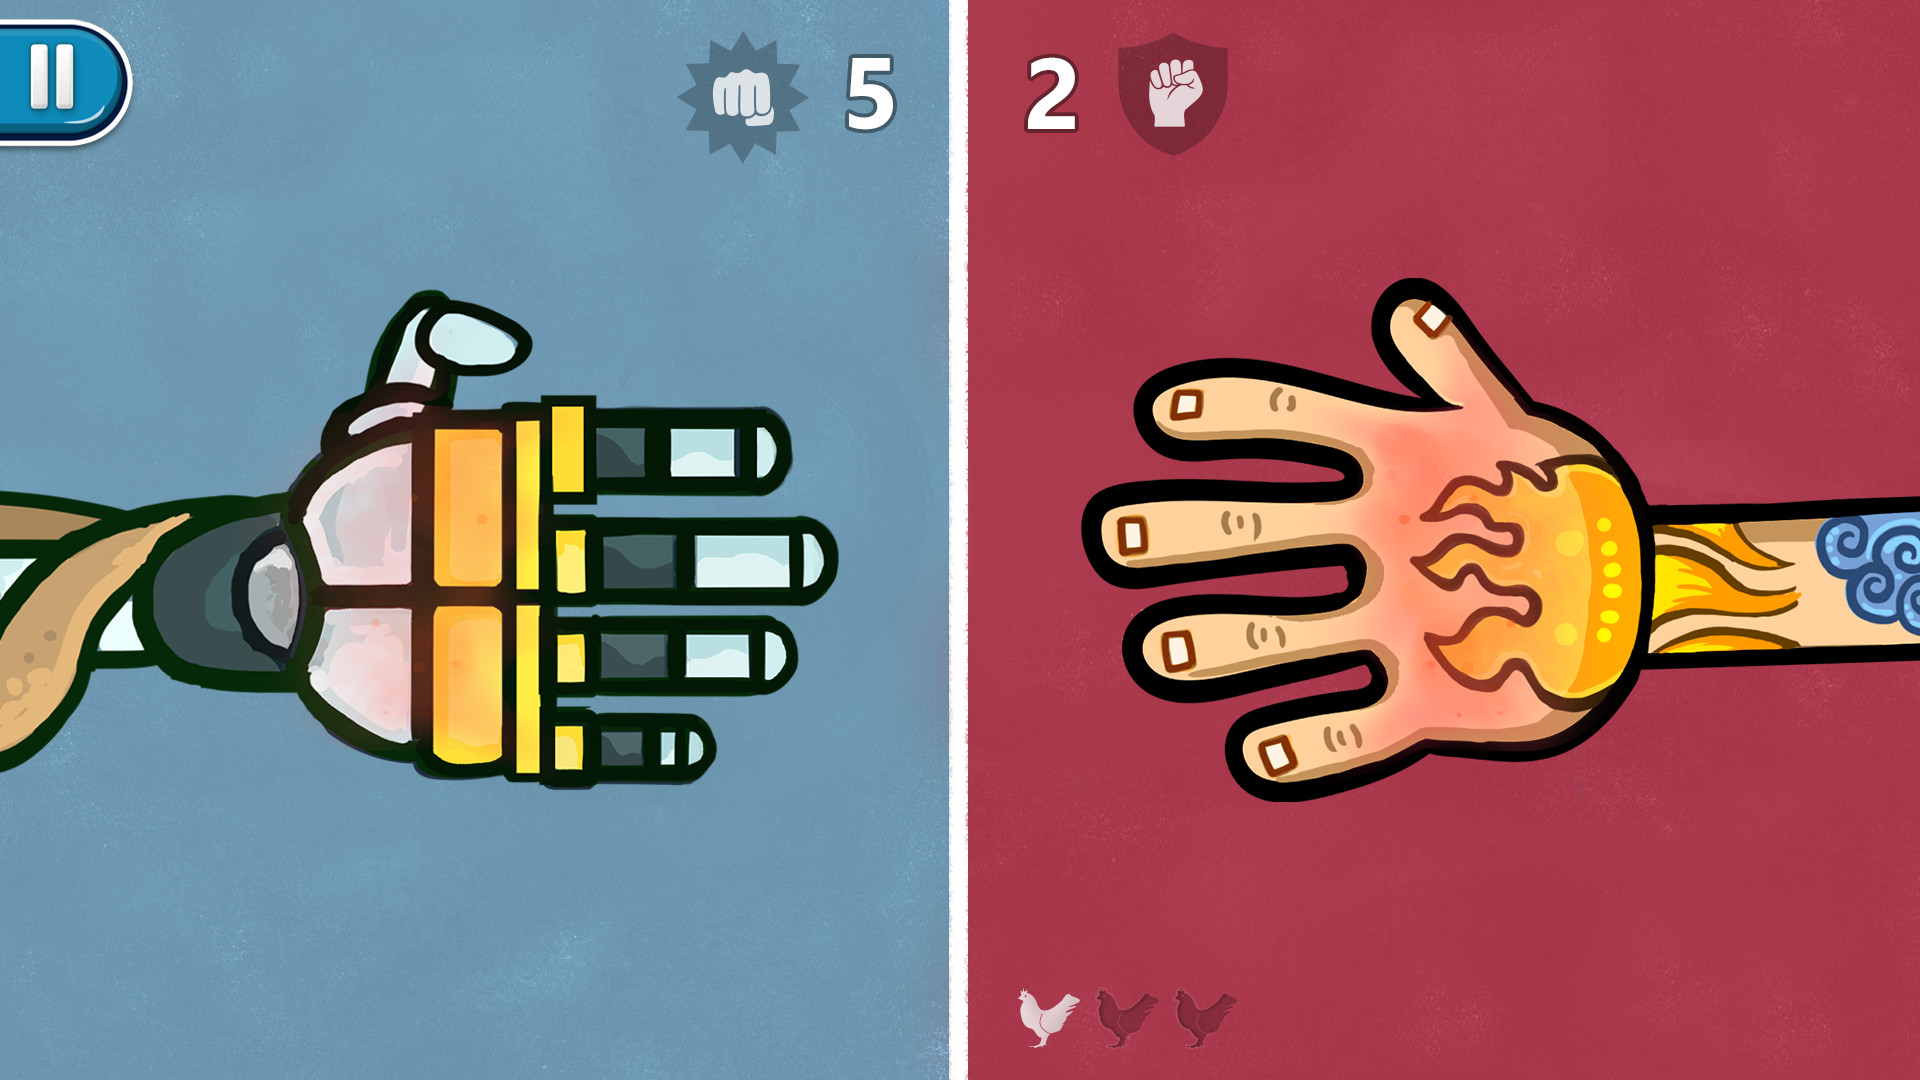 Red Hands - 2 Player Games